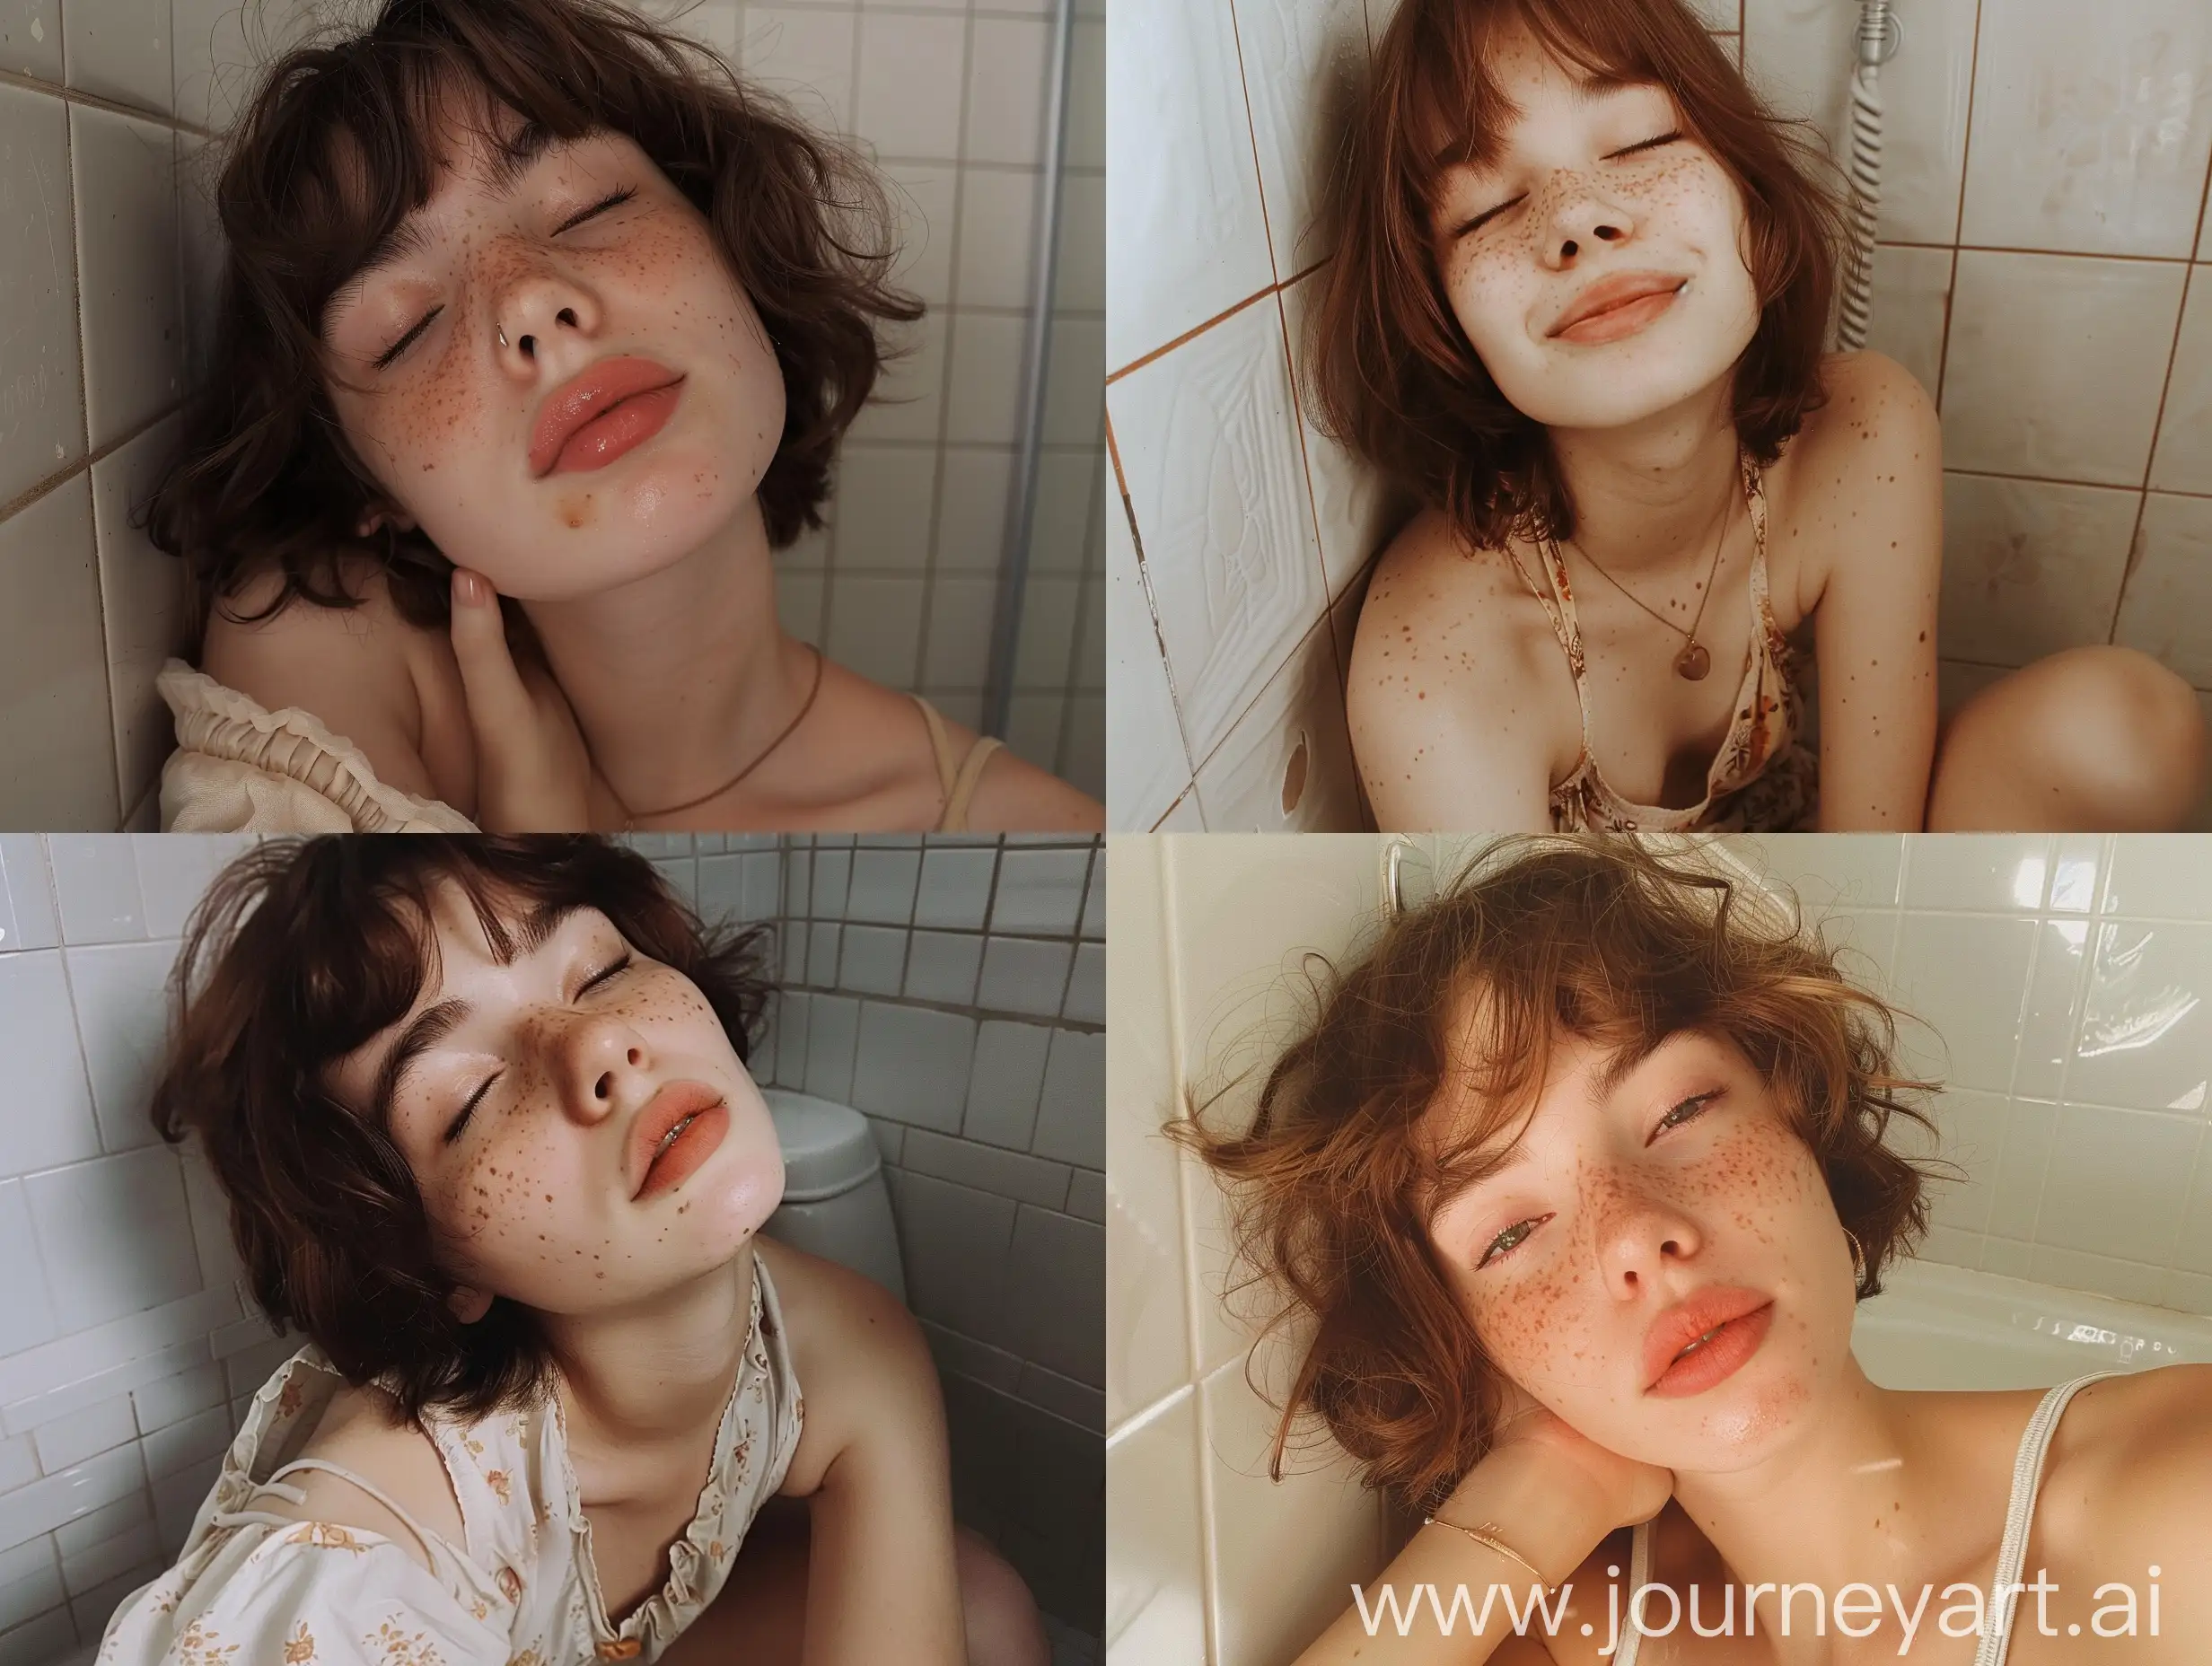 Aesthetic instagram selfie of a young girl, lavatory, knees under chin, silly face, eyes closed, adorable, cute, happy, close up selfie, freckles, brown hair, short hair, full hair